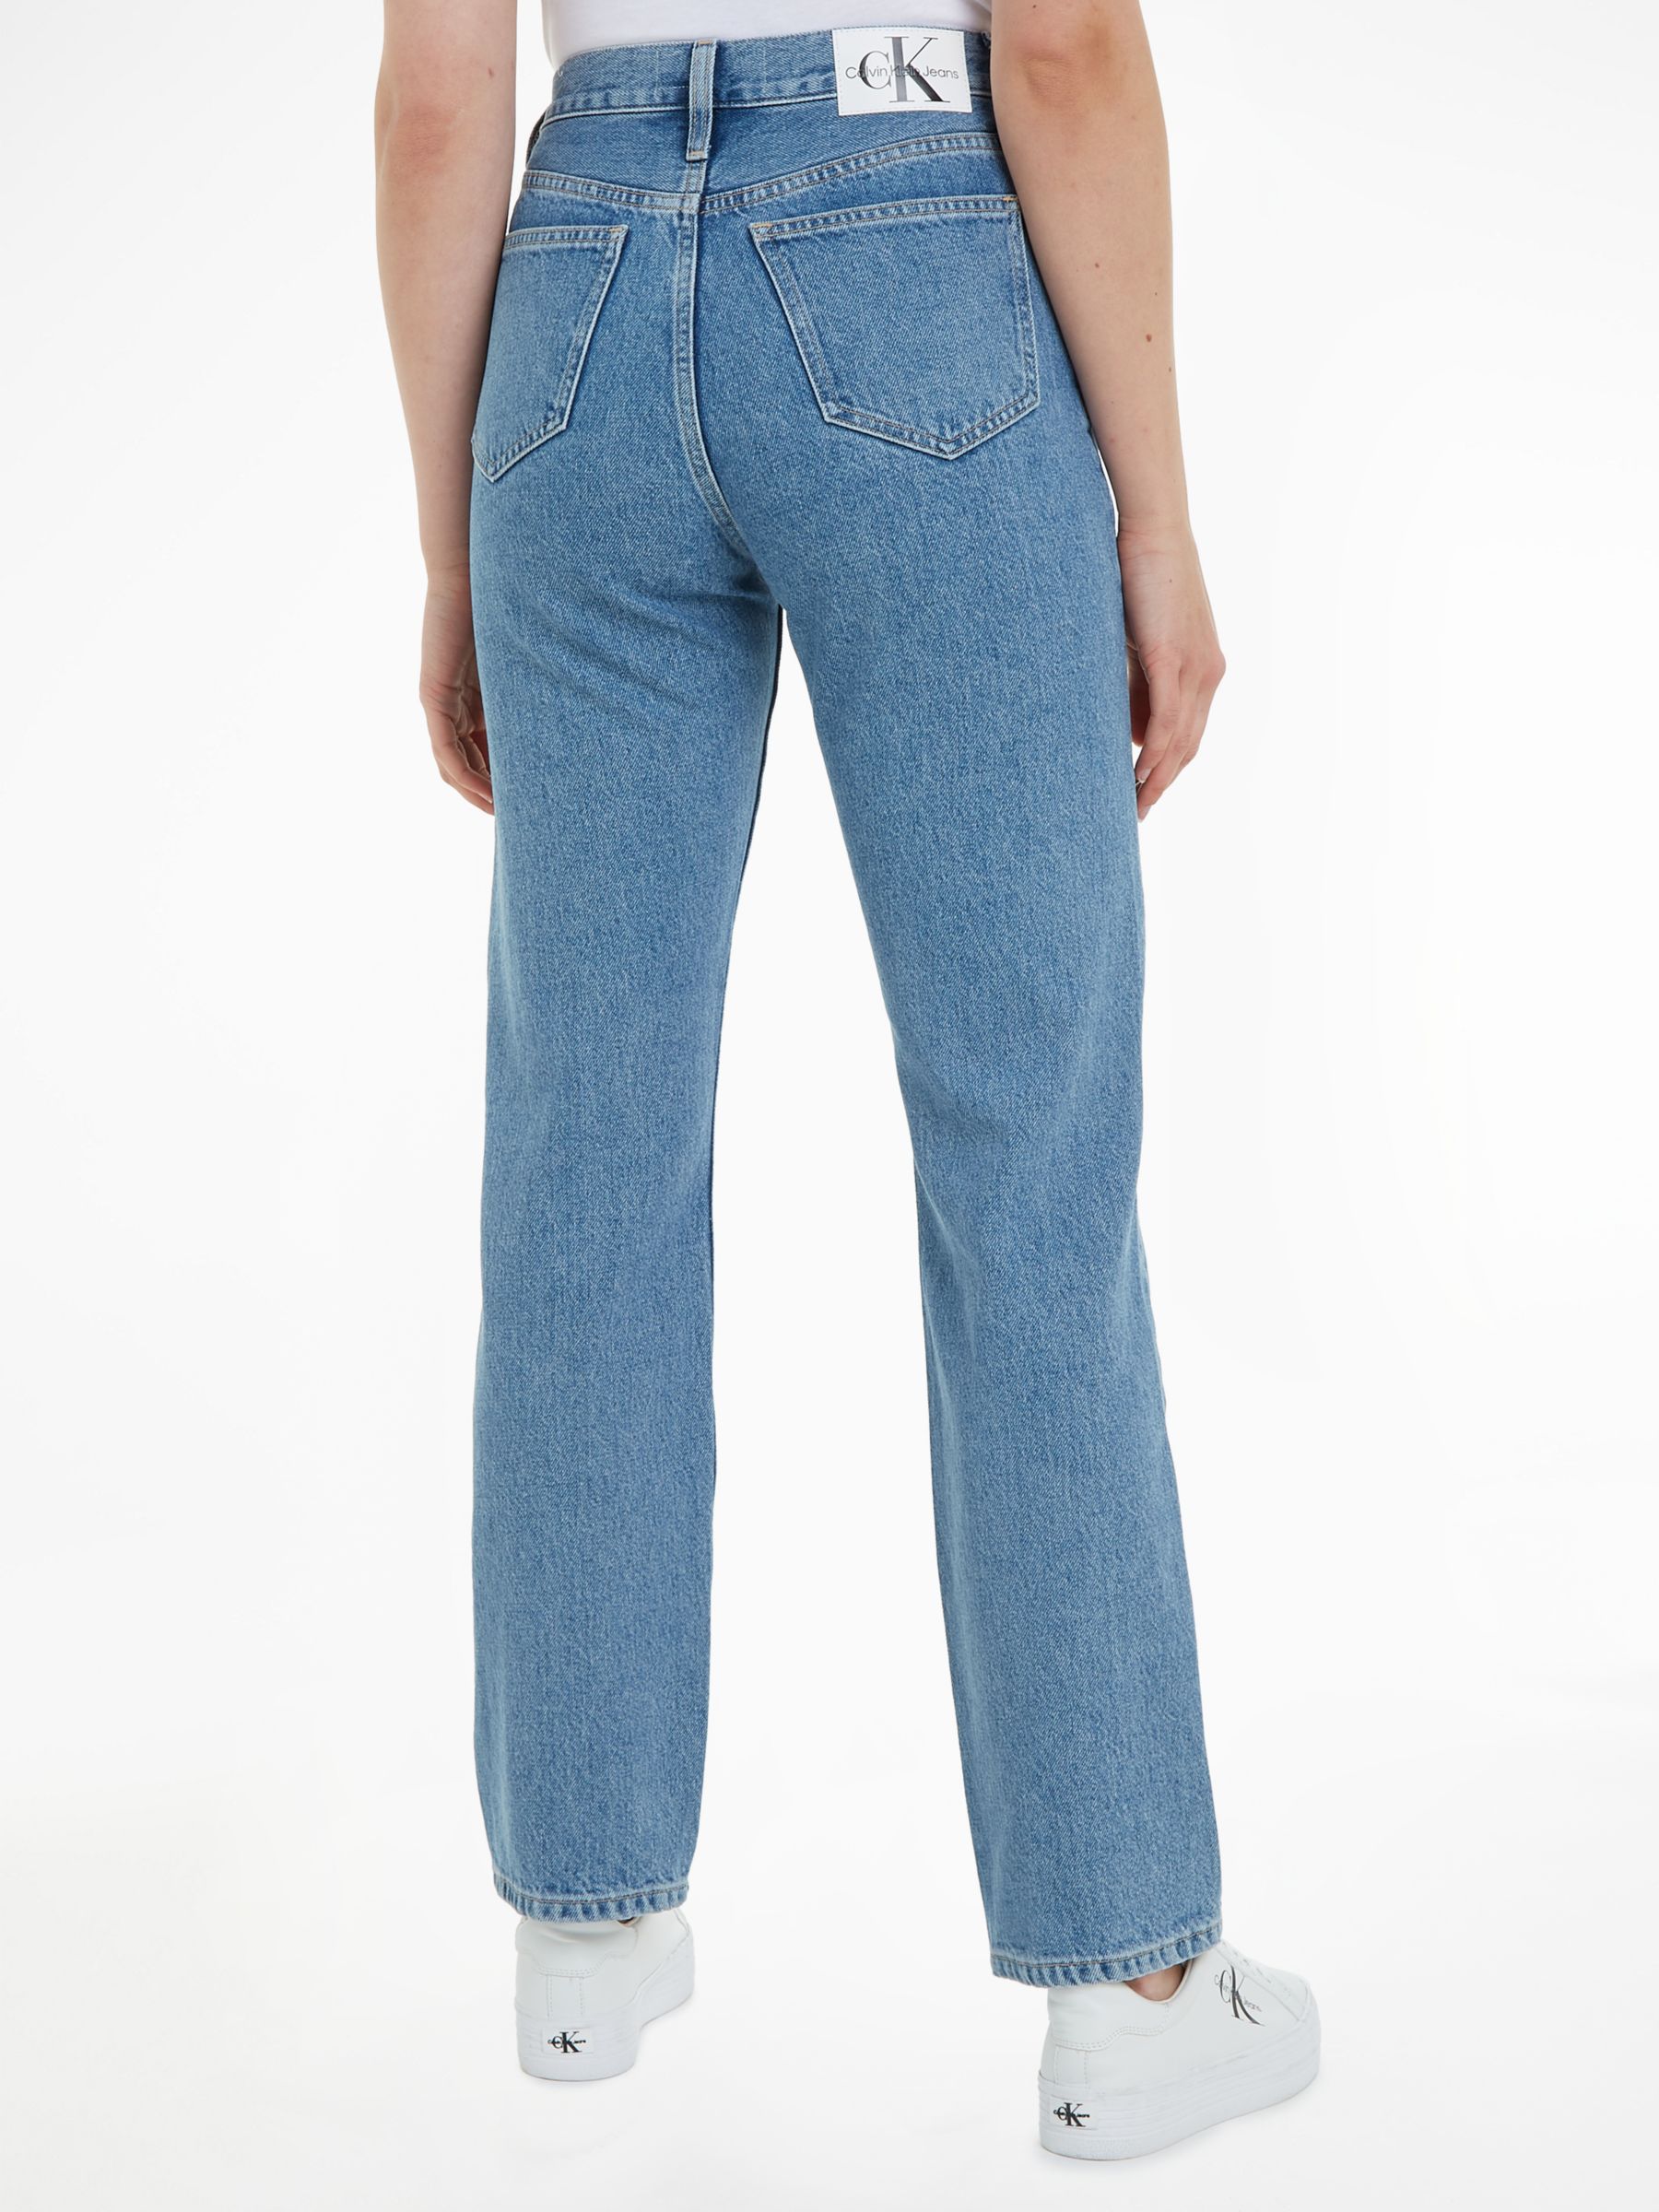 Buy Calvin Klein High Rise Straight Cut Jeans Online at johnlewis.com